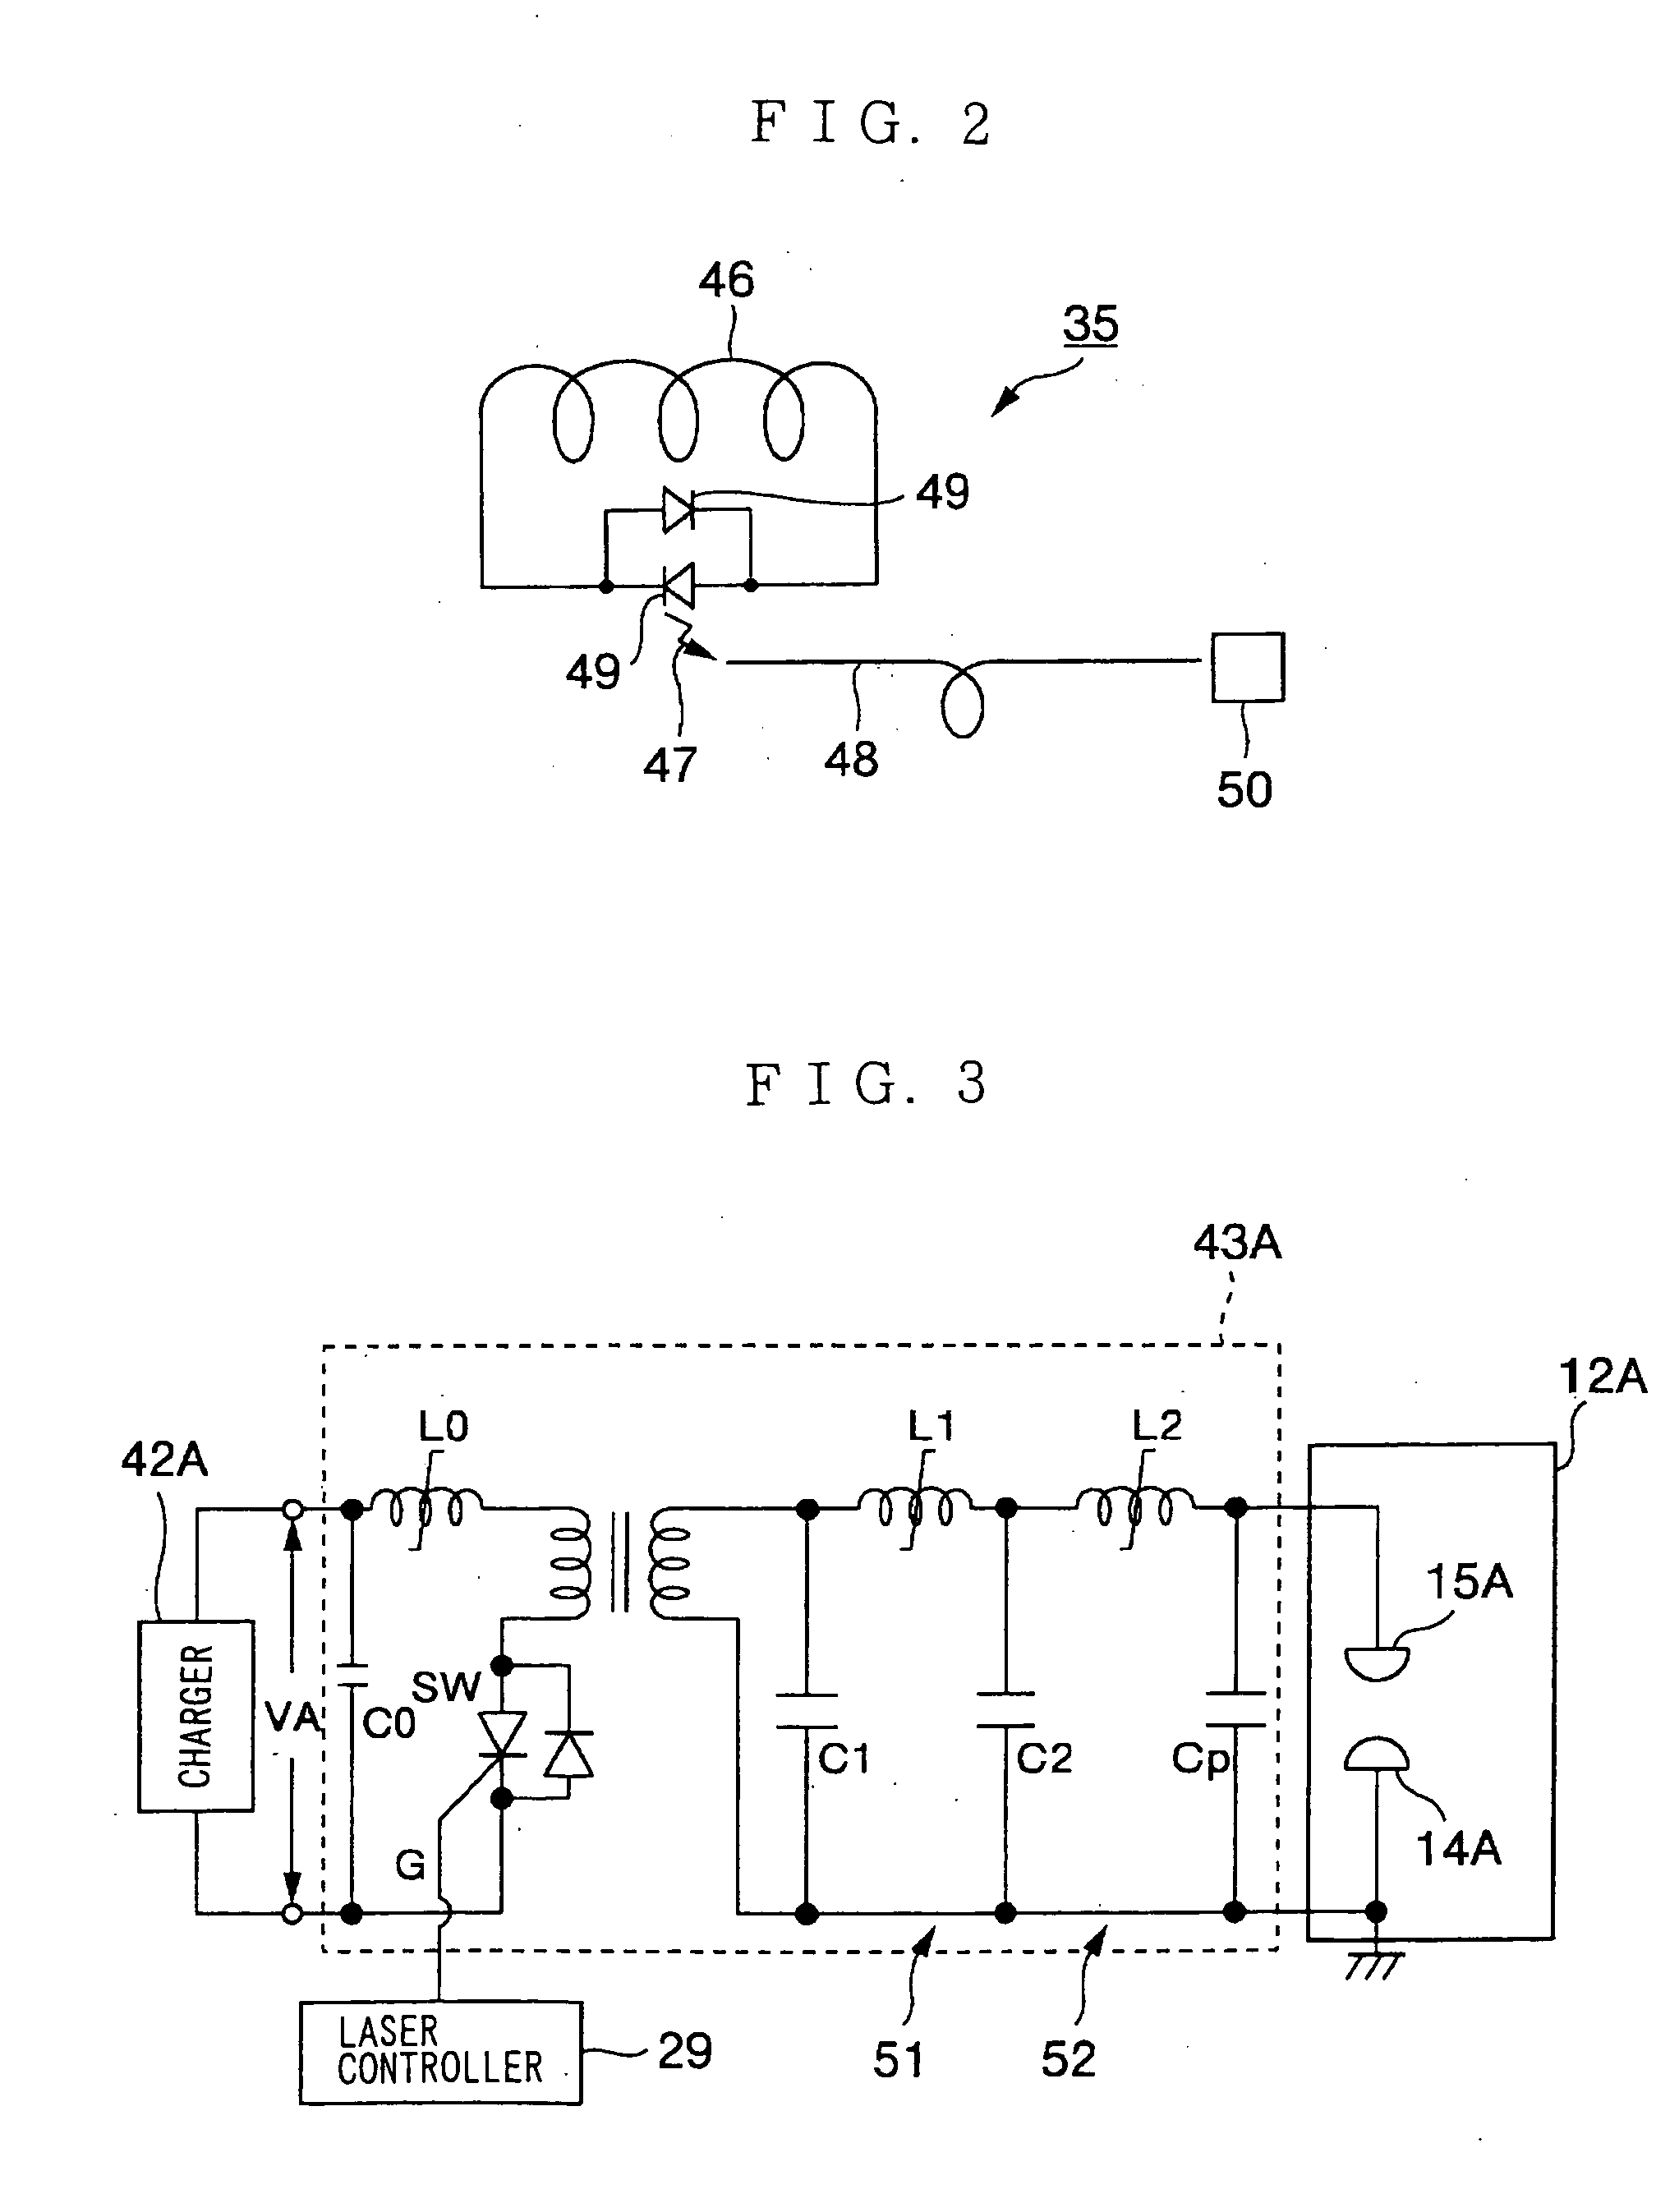 Injection locking type or MOPA type of laser device